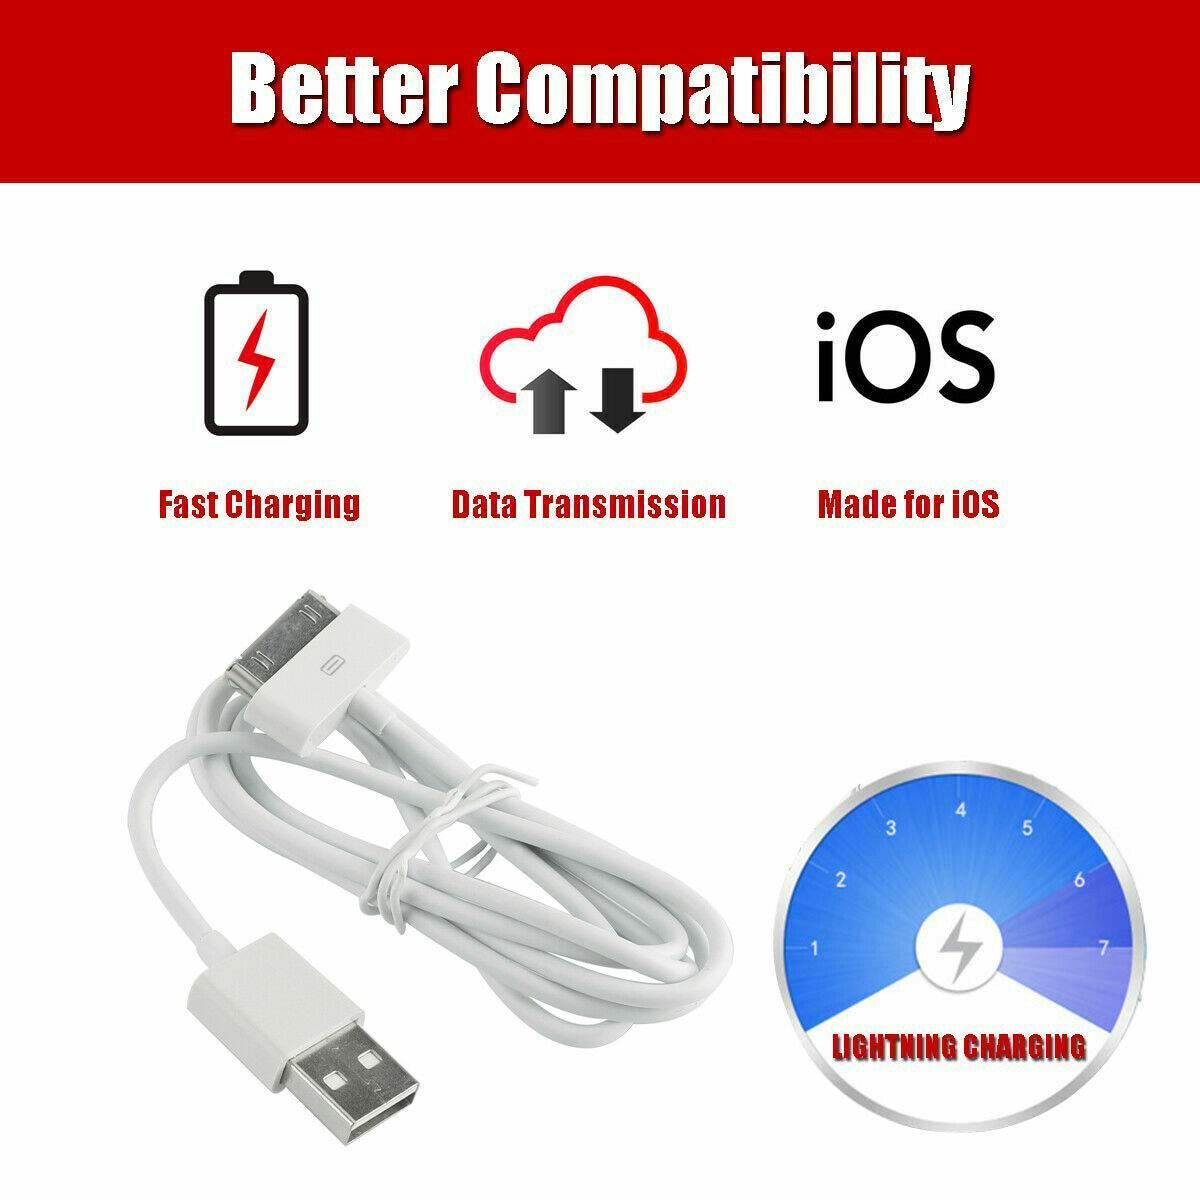 3Pack 30 pin USB Charging Data/Sync Cable Cord for iPad 1/2/3 iPod Nano 1-6 easybuystation Does Not Apply - фотография #5